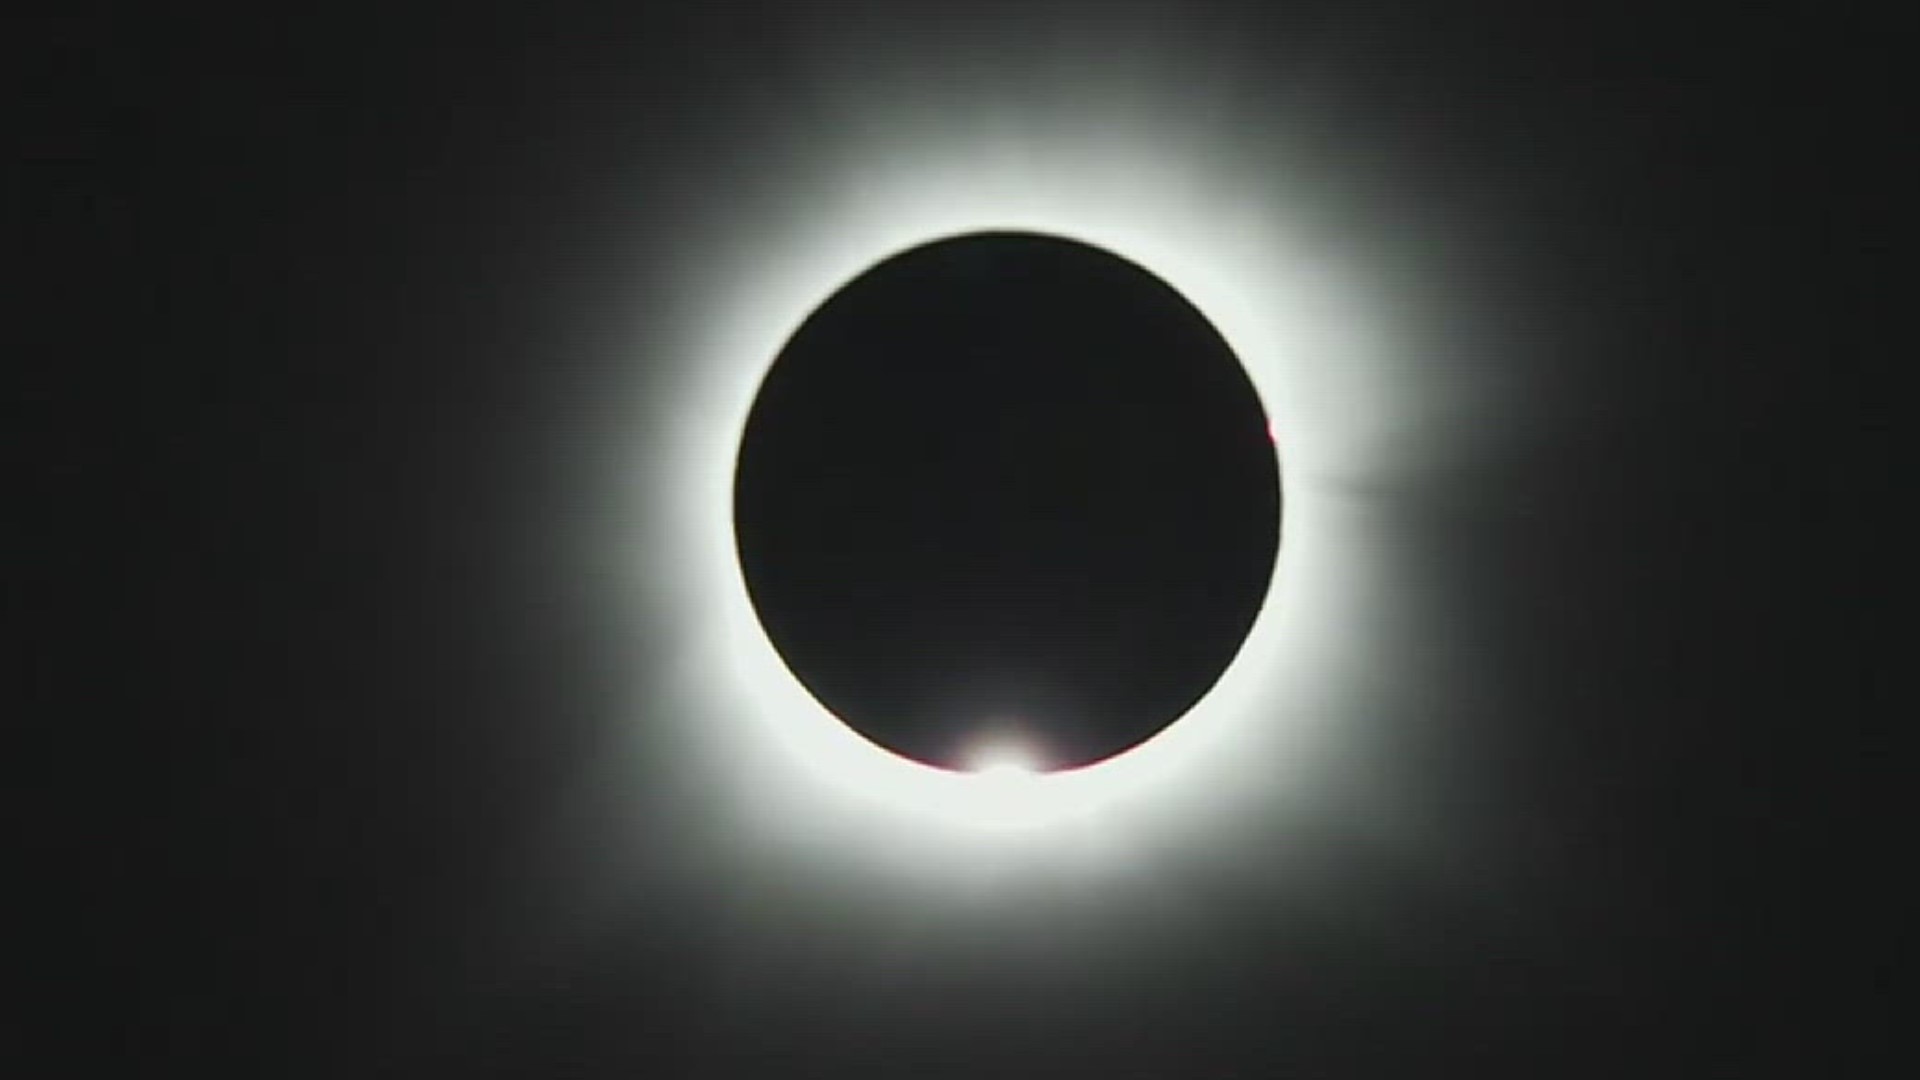 WHAS11 was in French Lick, Indiana when the total solar eclipse happened in 2024.